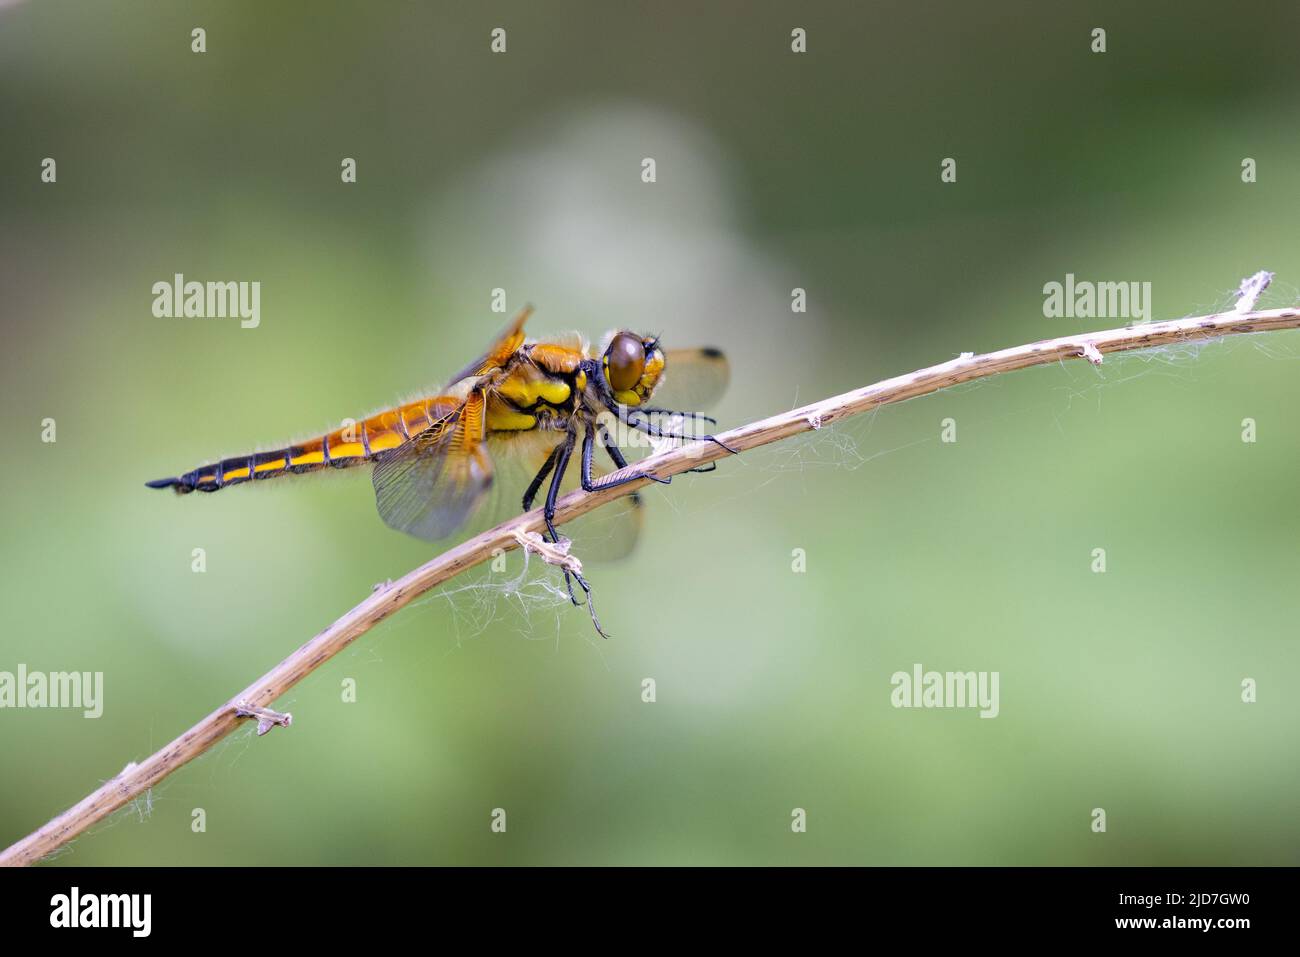 Four spotted chaser dragonfly [ Libellula quadrimaculata ] on twig/stem Stock Photo